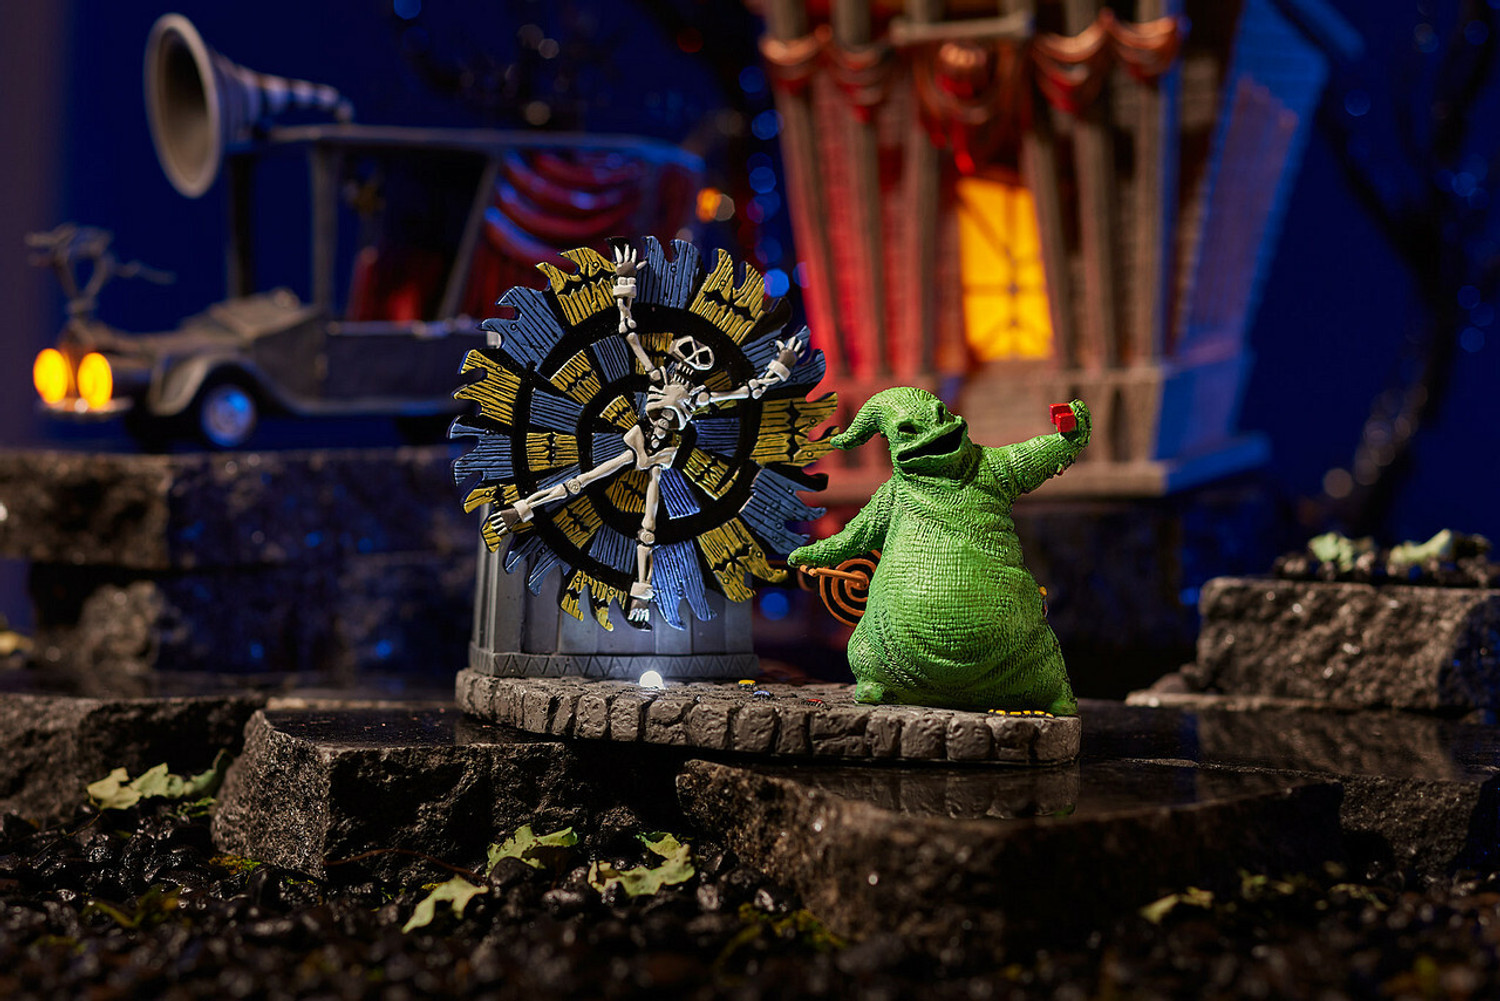 Department 56 The Nightmare Before Christmas Oogie Boogie Gives a Spin  Animated Village Figure 6004819